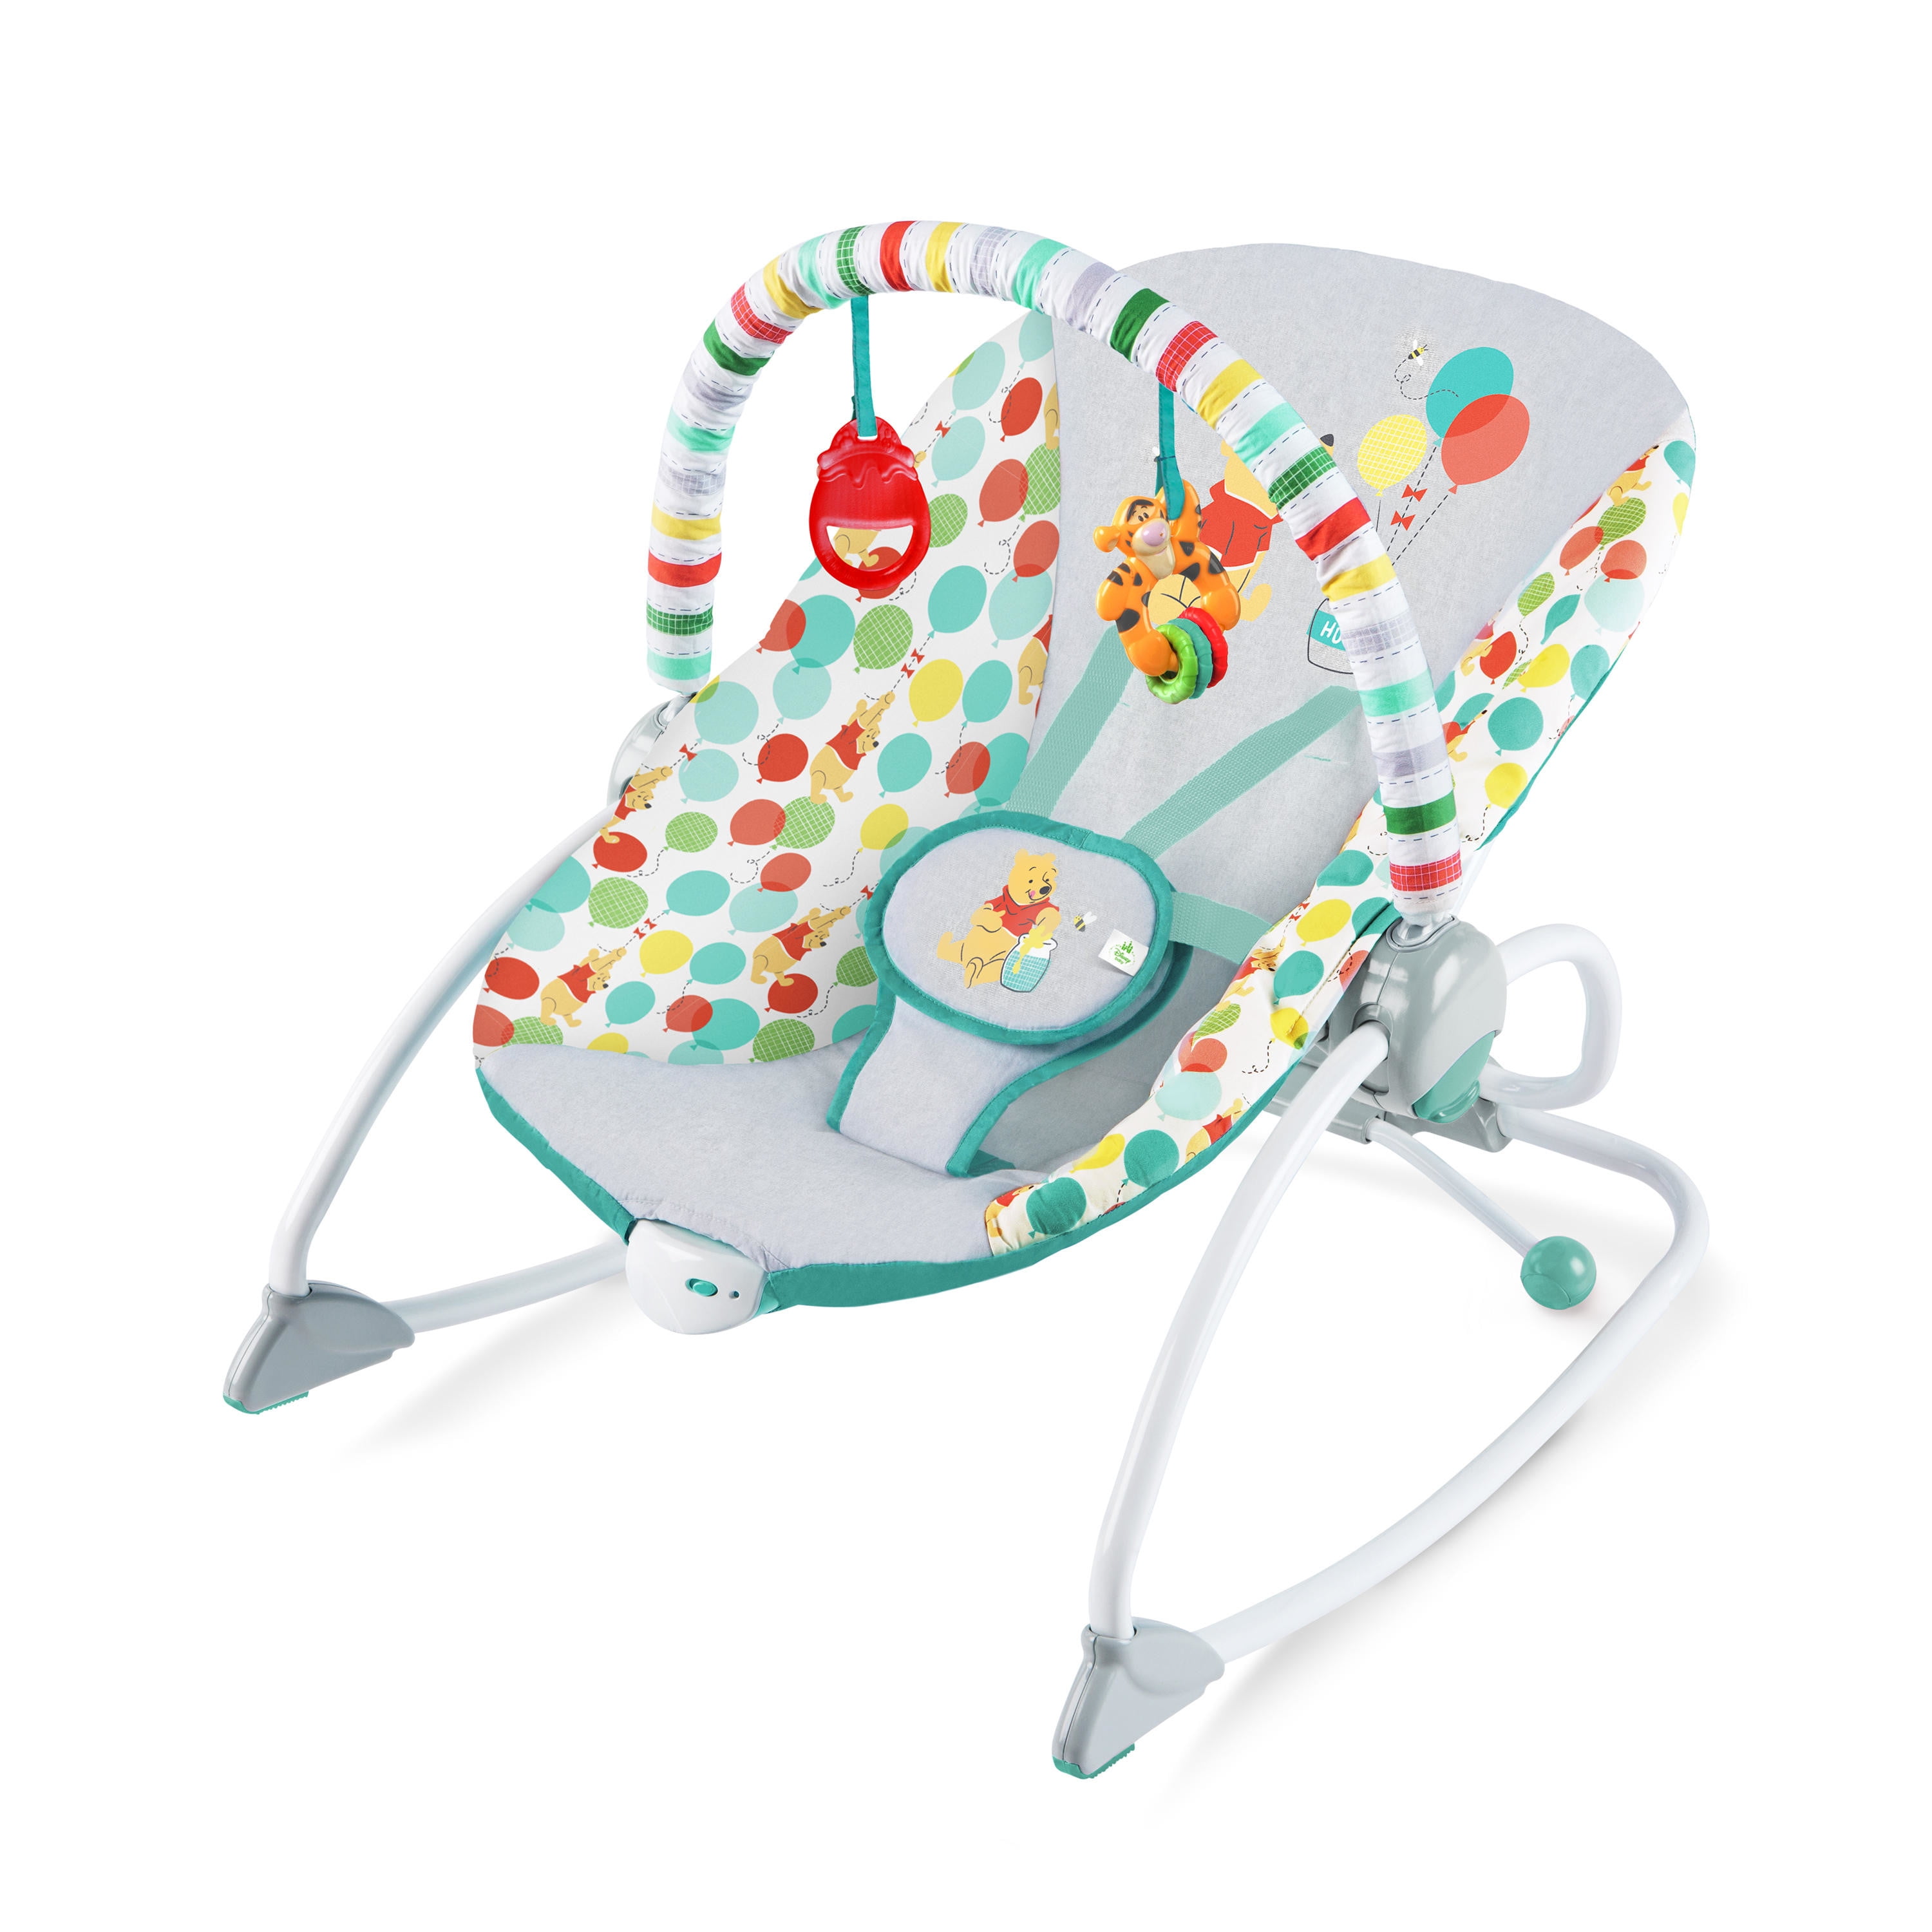 Disney Baby Winnie the Pooh Infant to Toddler Rocker Seat - Happy As Can Bee